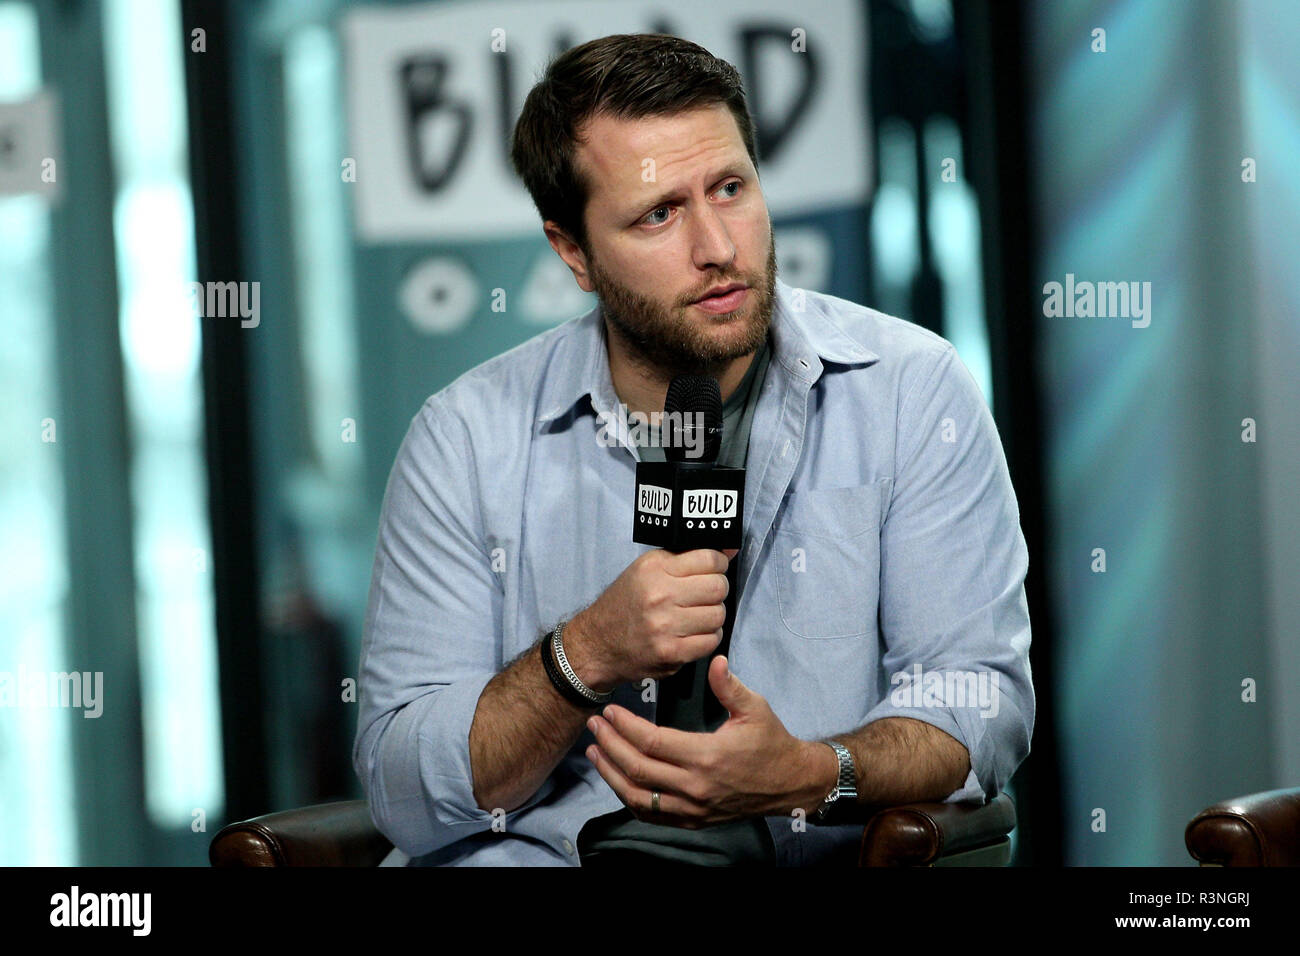 NEW YORK, NY - JULY 07:  Producer/Director Matthew Heineman visits Build to discuss the new film 'City Of Ghosts' at Build Studio on July 7, 2017 in New York City.  (Photo by Steve Mack/S.D. Mack Pictures) Stock Photo